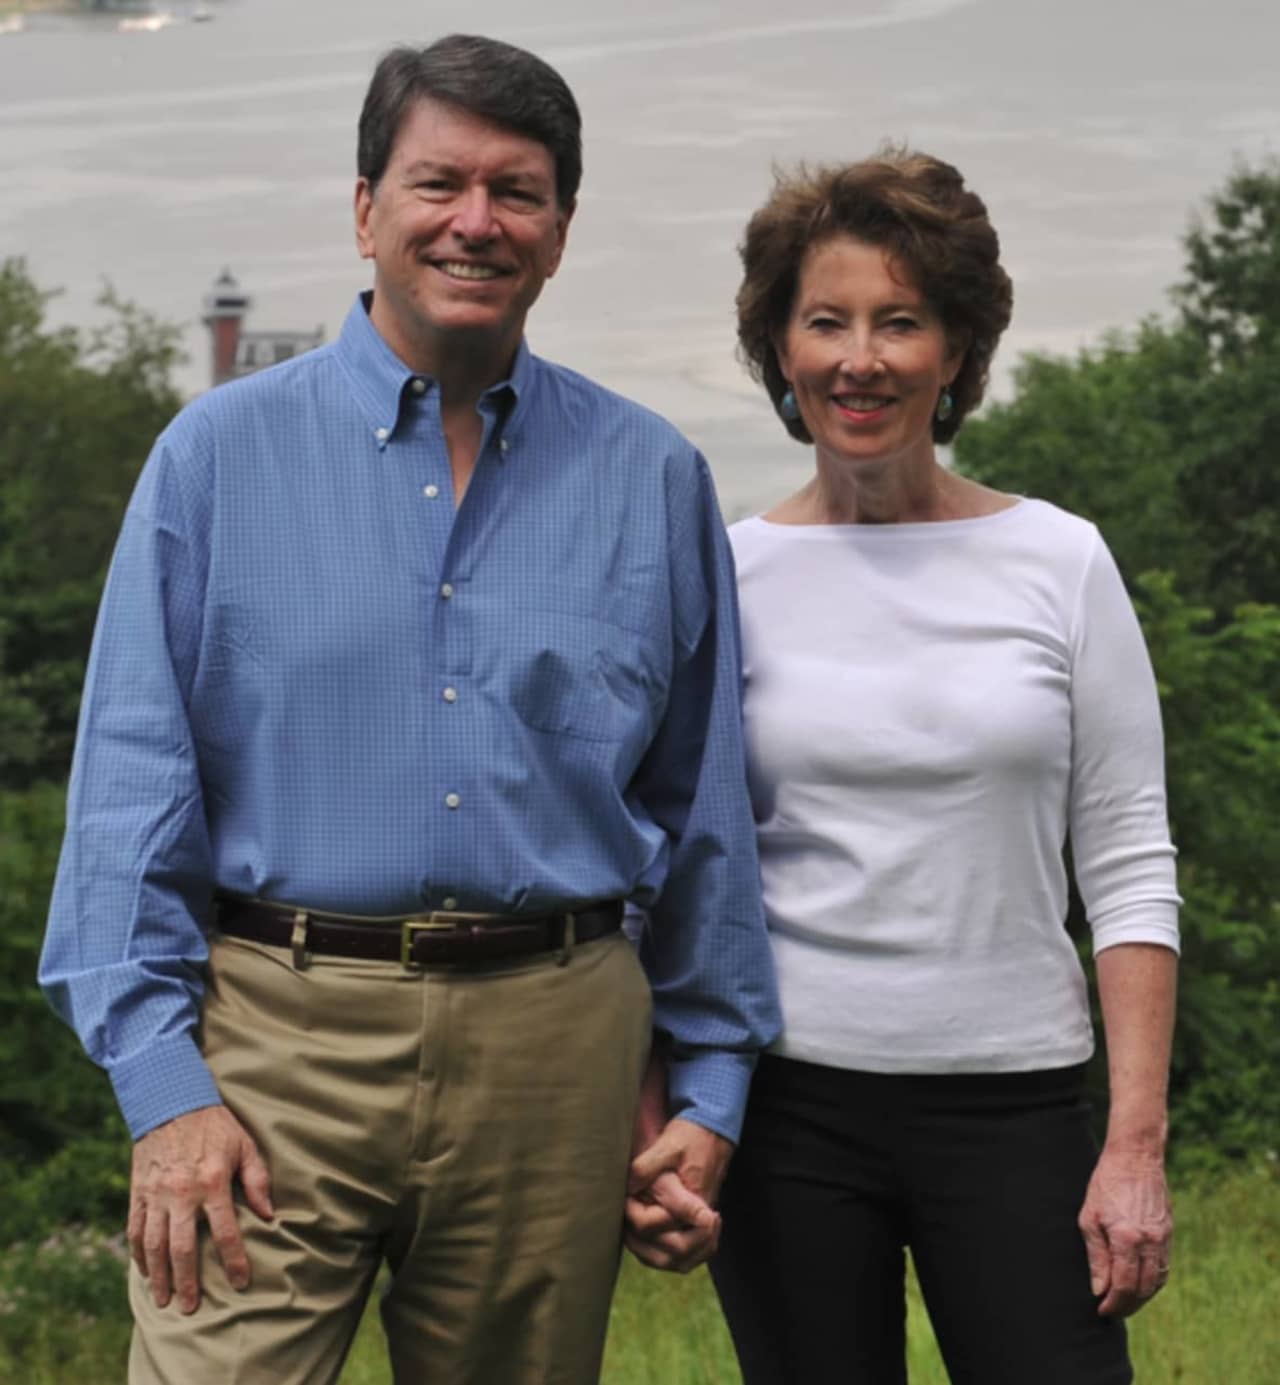 Republican congressional candidate John Faso with his wife, Mary Frances.